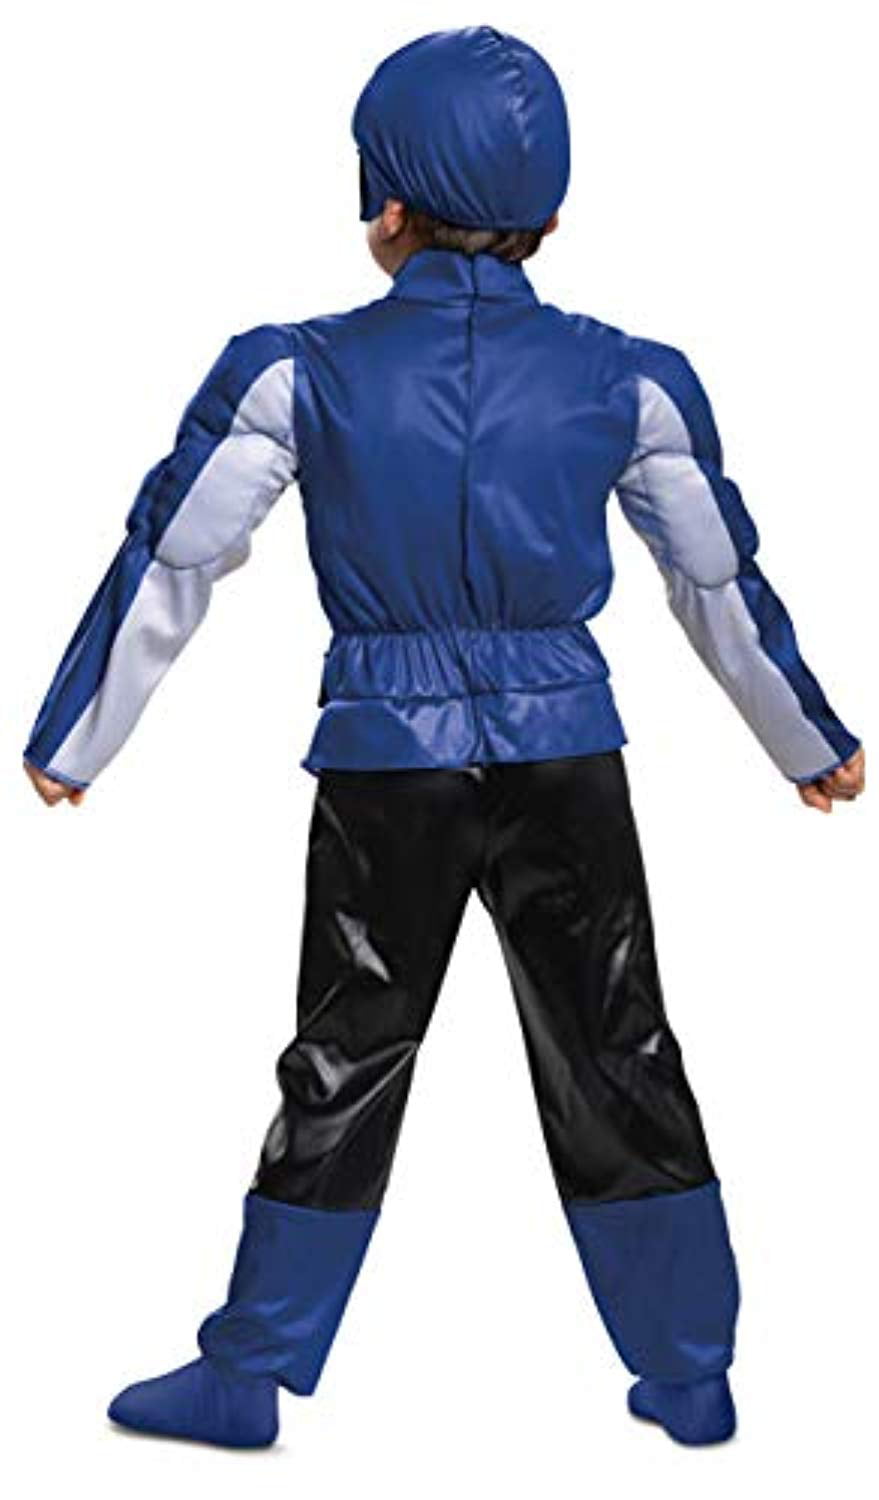 Blue Ranger Classic Childs Costume Small 3-4 years Beast Morphers Costume Rubies Official Power Rangers